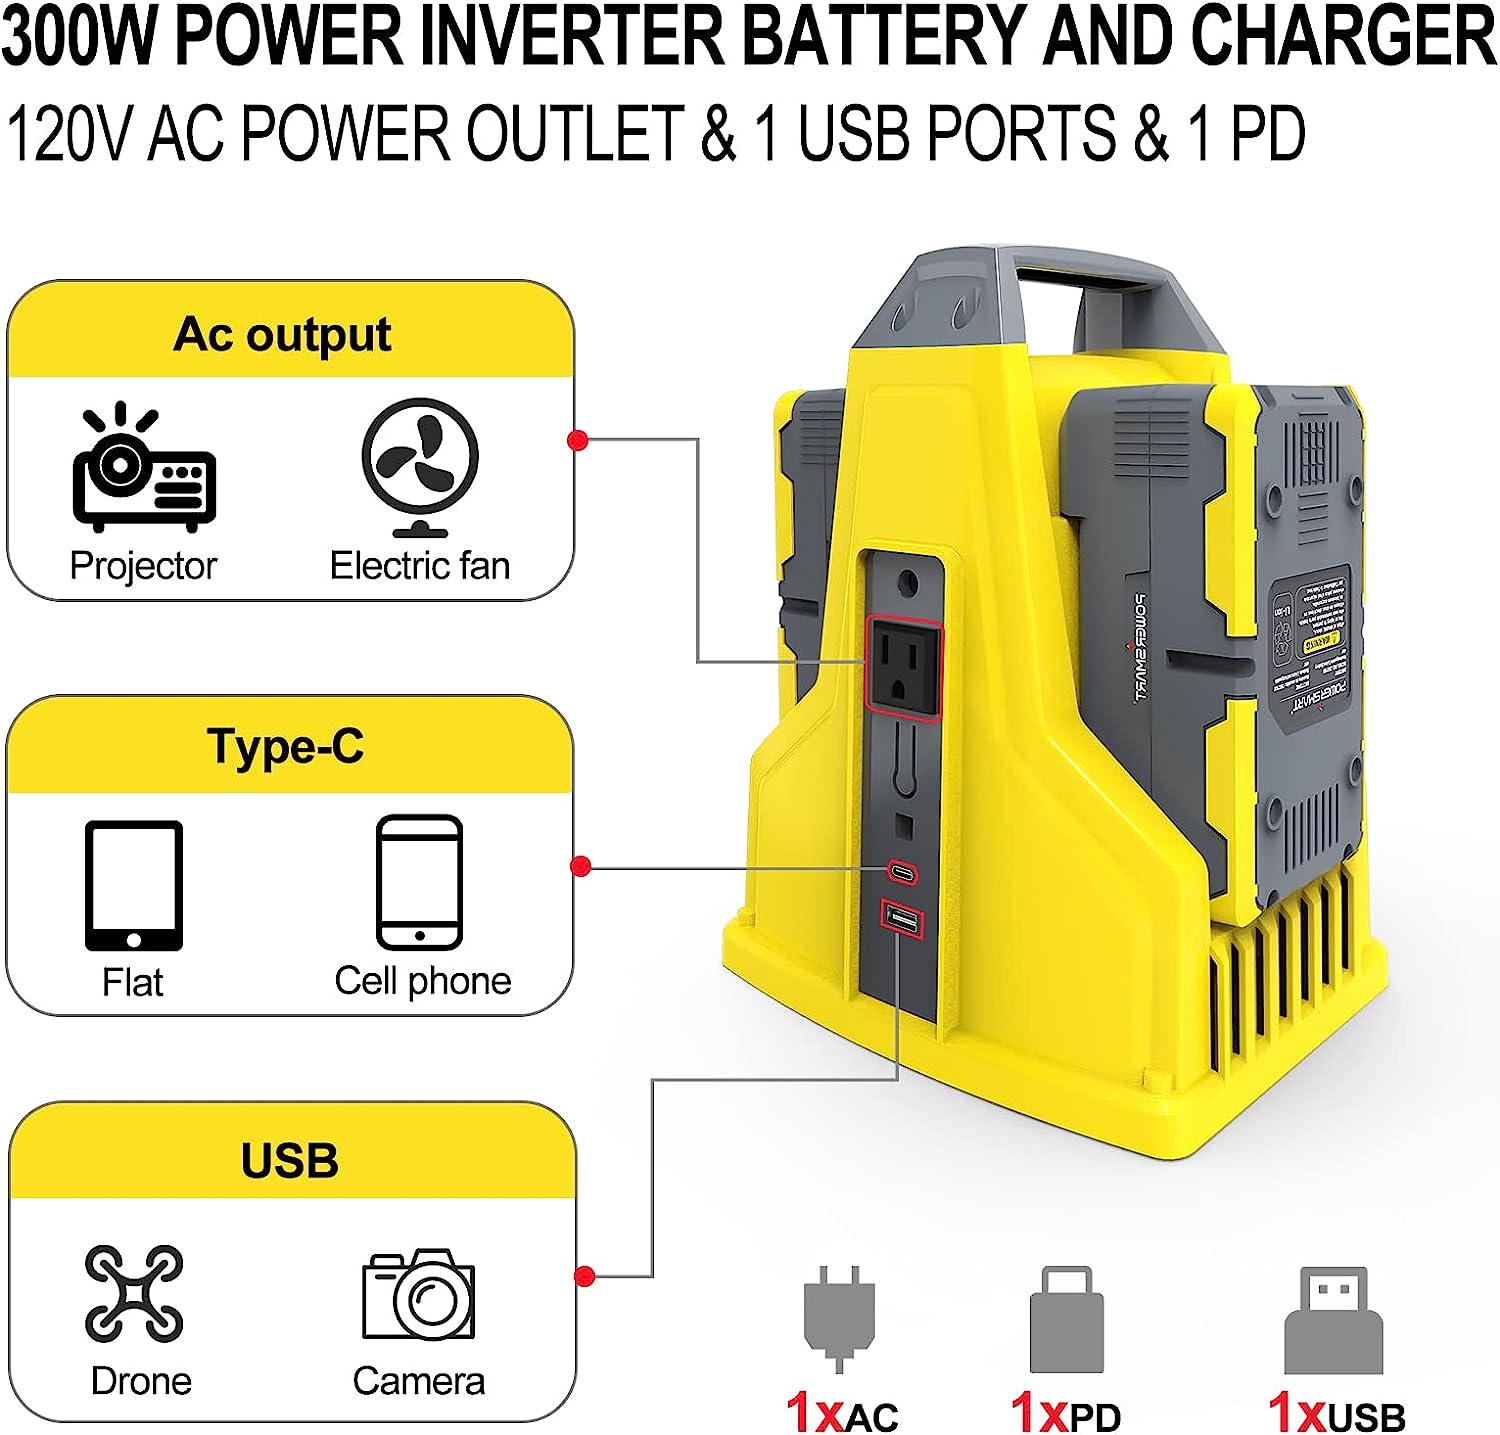 Powersmart, Powersmart DB9801 Power Inverter Battery and Charger 300W New